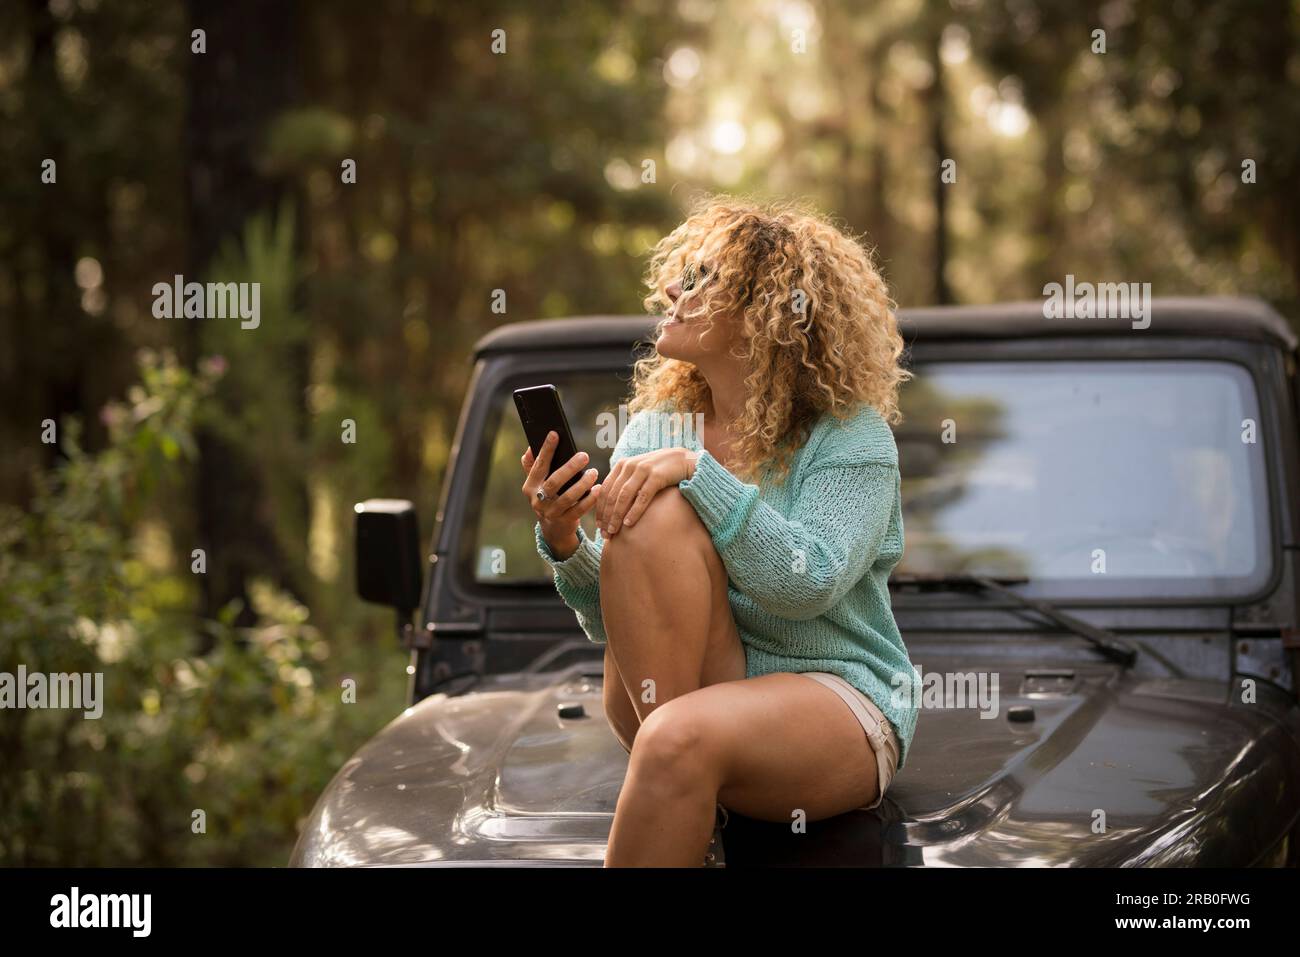 Young tourist lady enjoy car travel destination in the natural park sitting on the vehicle and using mobile phone. Traveler and adventure lifestyle. Weekend outdoor leisure activity alone. One woman Stock Photo